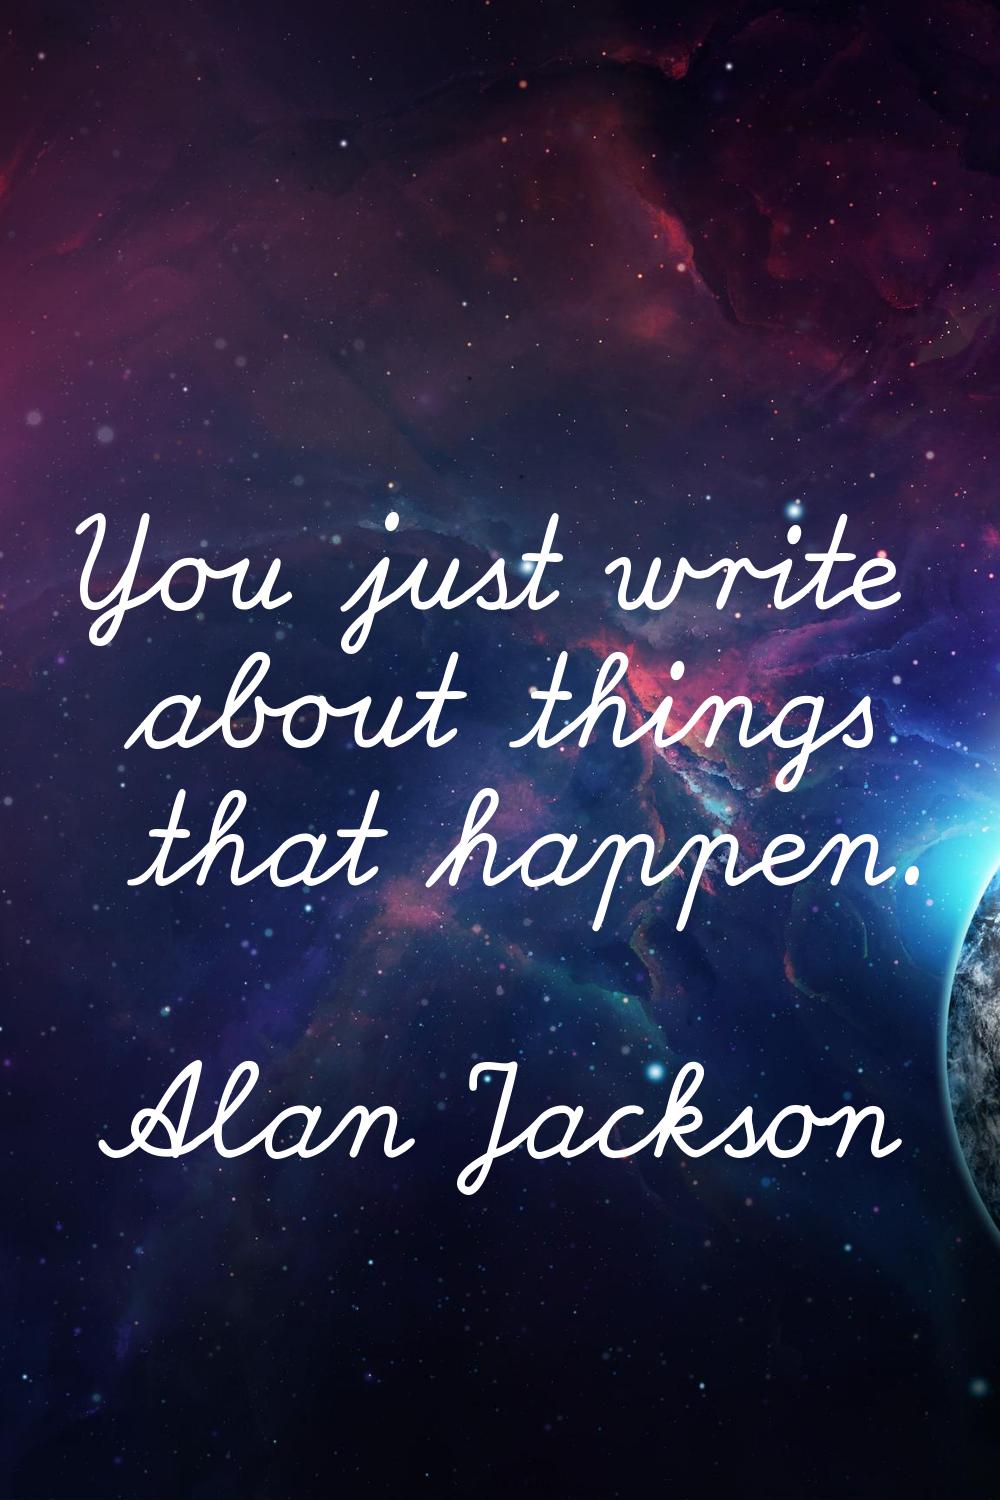 You just write about things that happen.